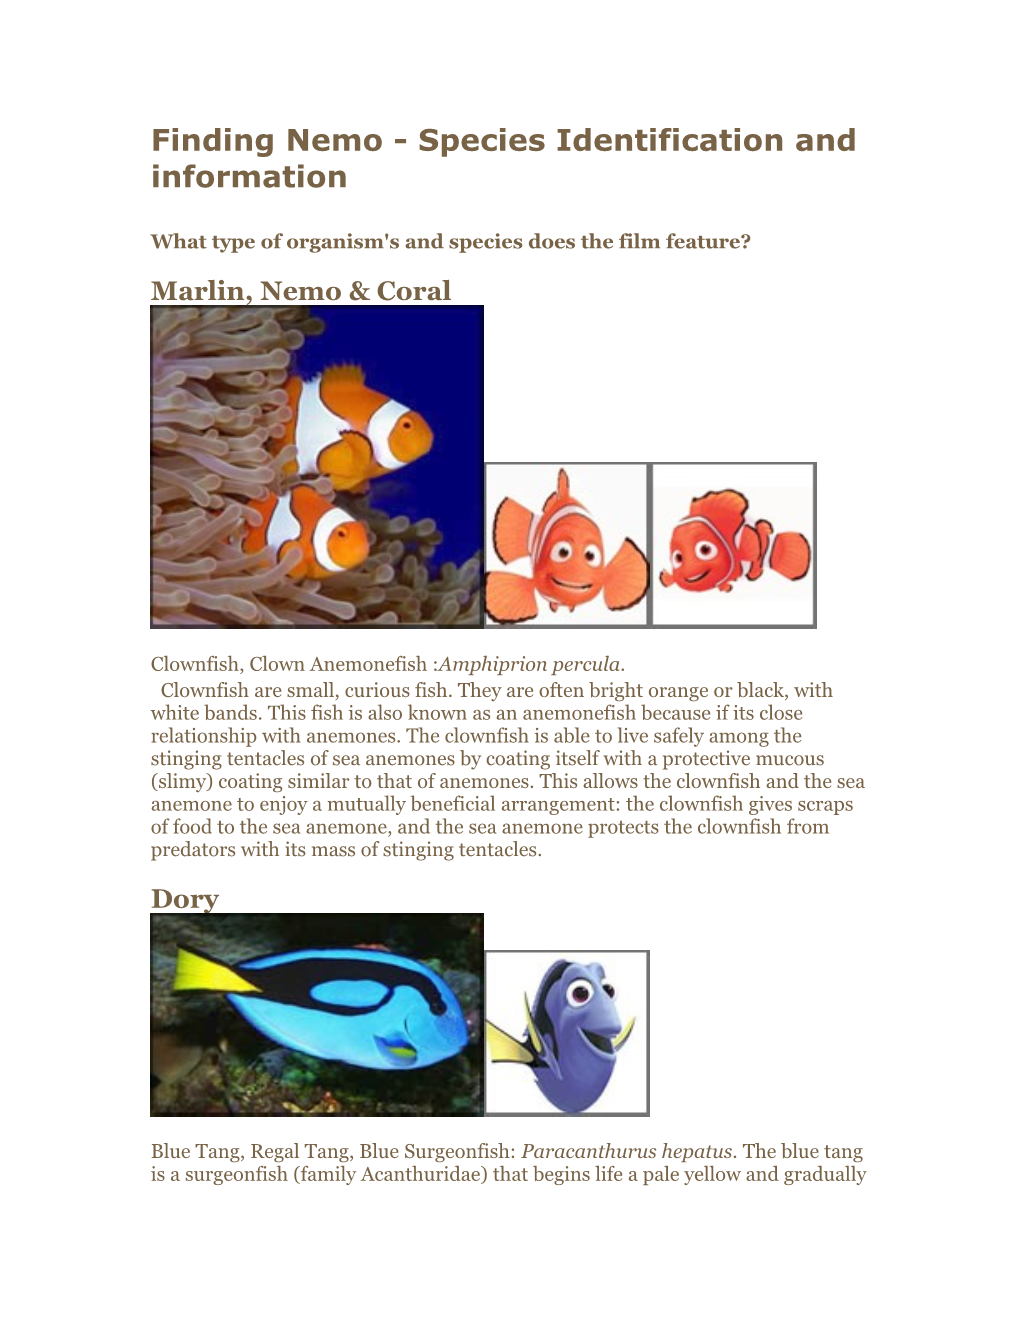 Finding Nemo - Species Identification and Information